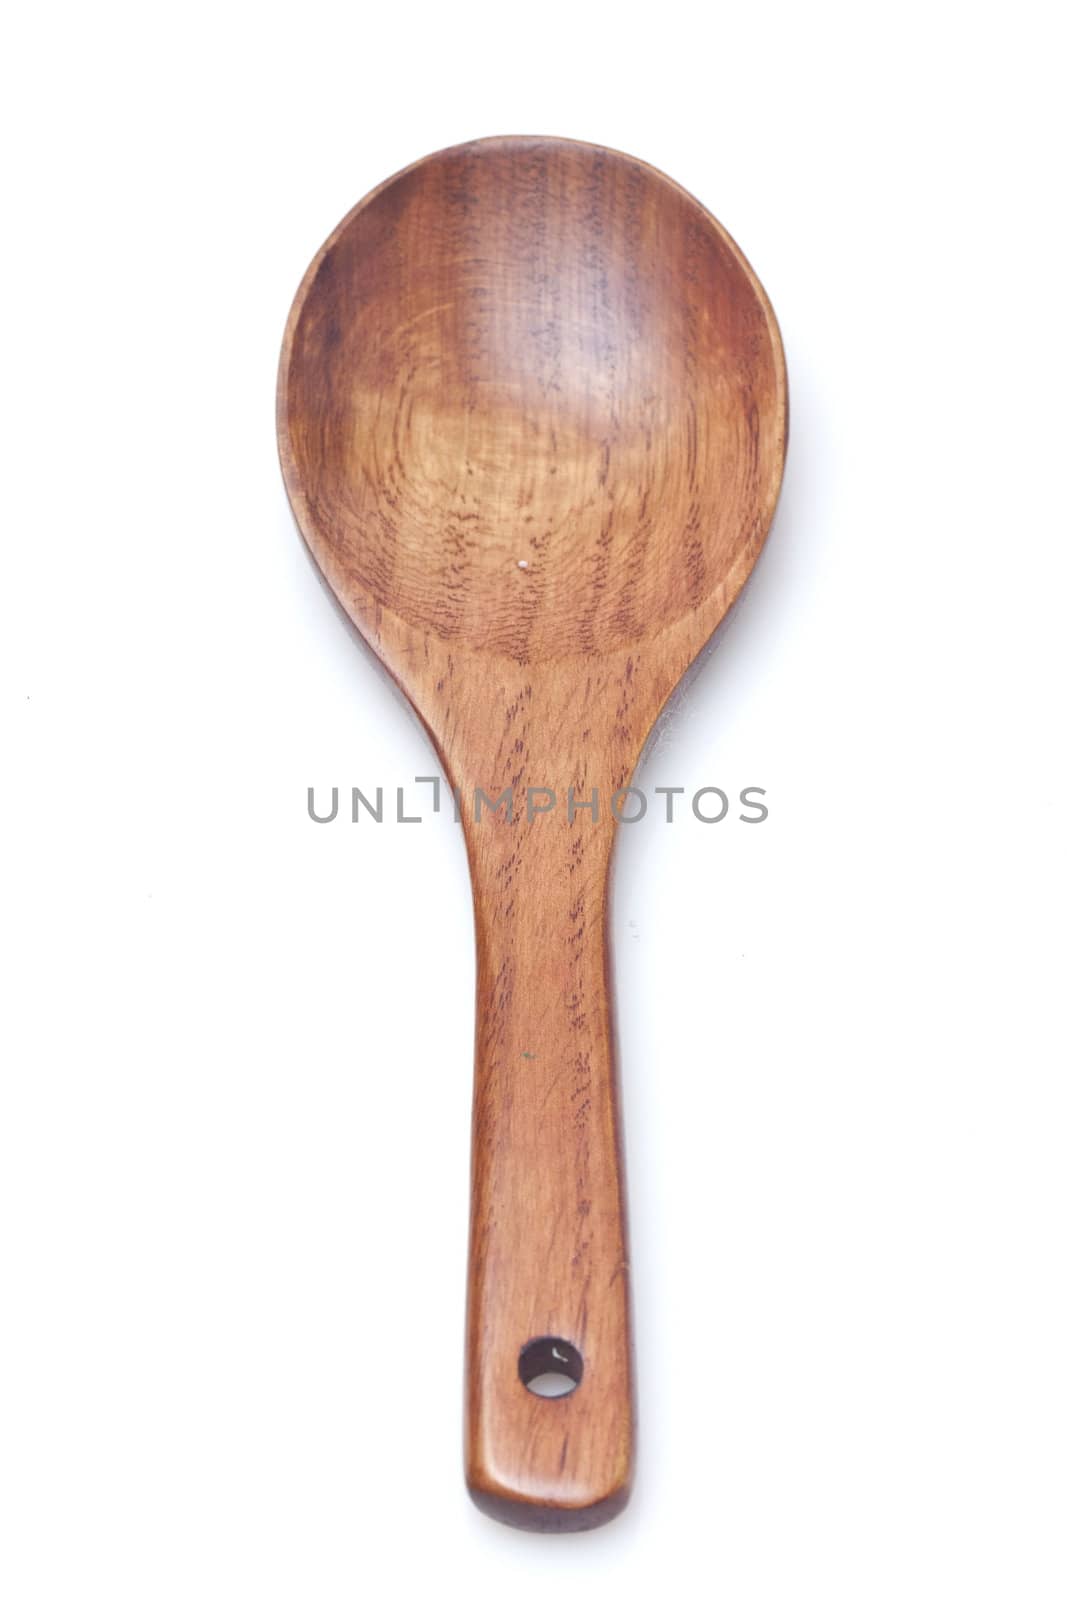 Wooden spoon isolated on white background by kawing921